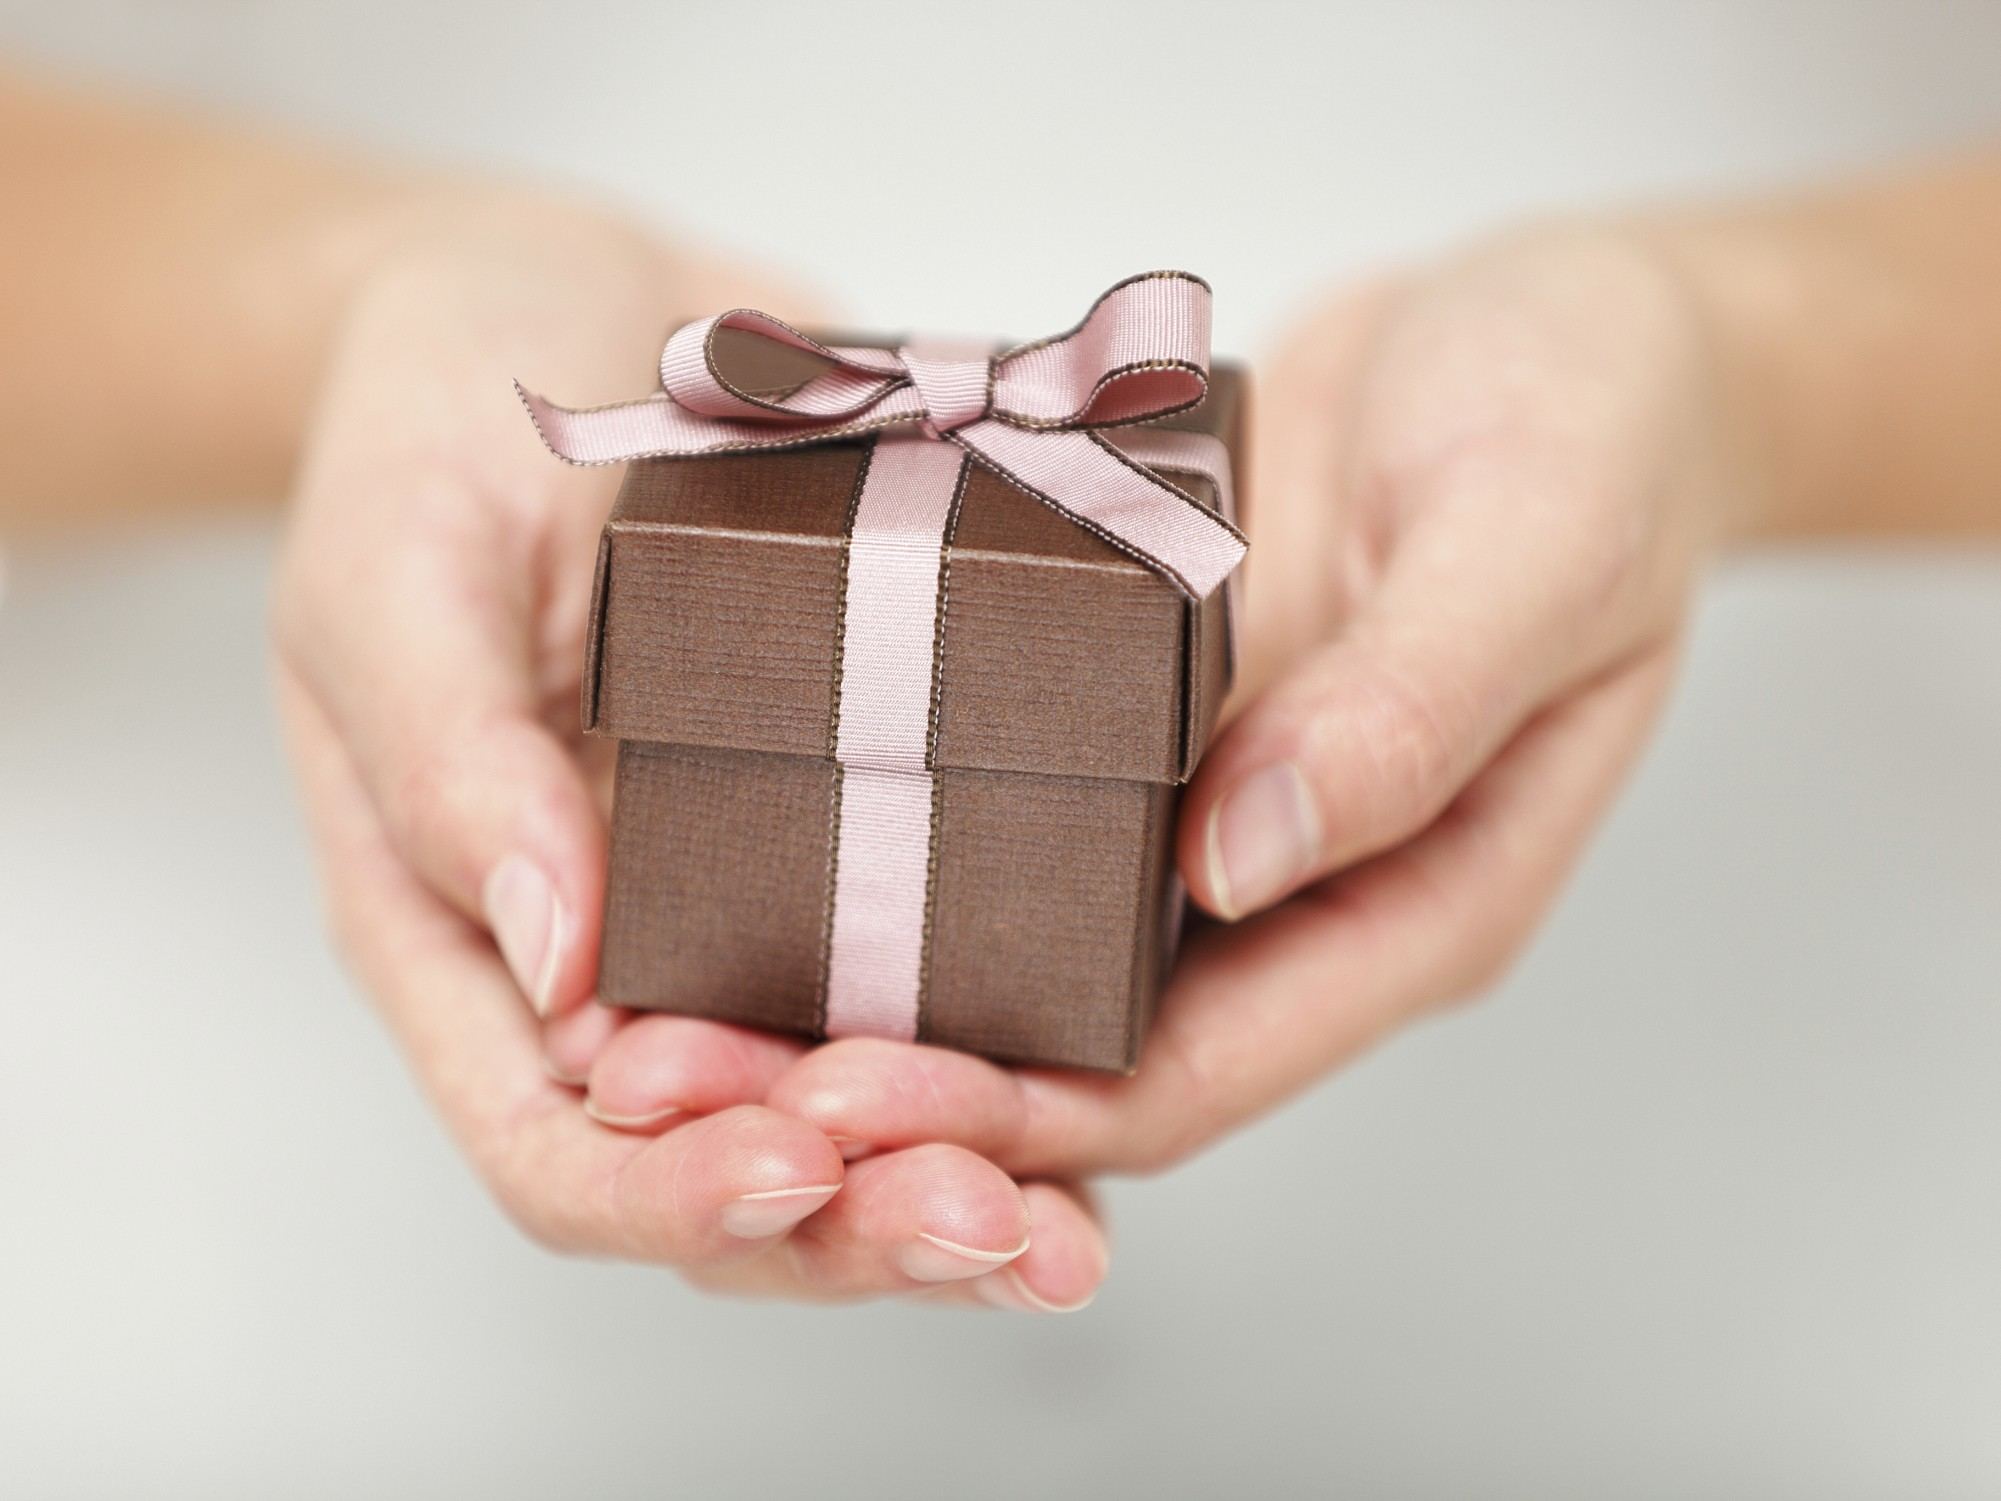 Christmas Gift Exchange – A Sign of Attention and Love